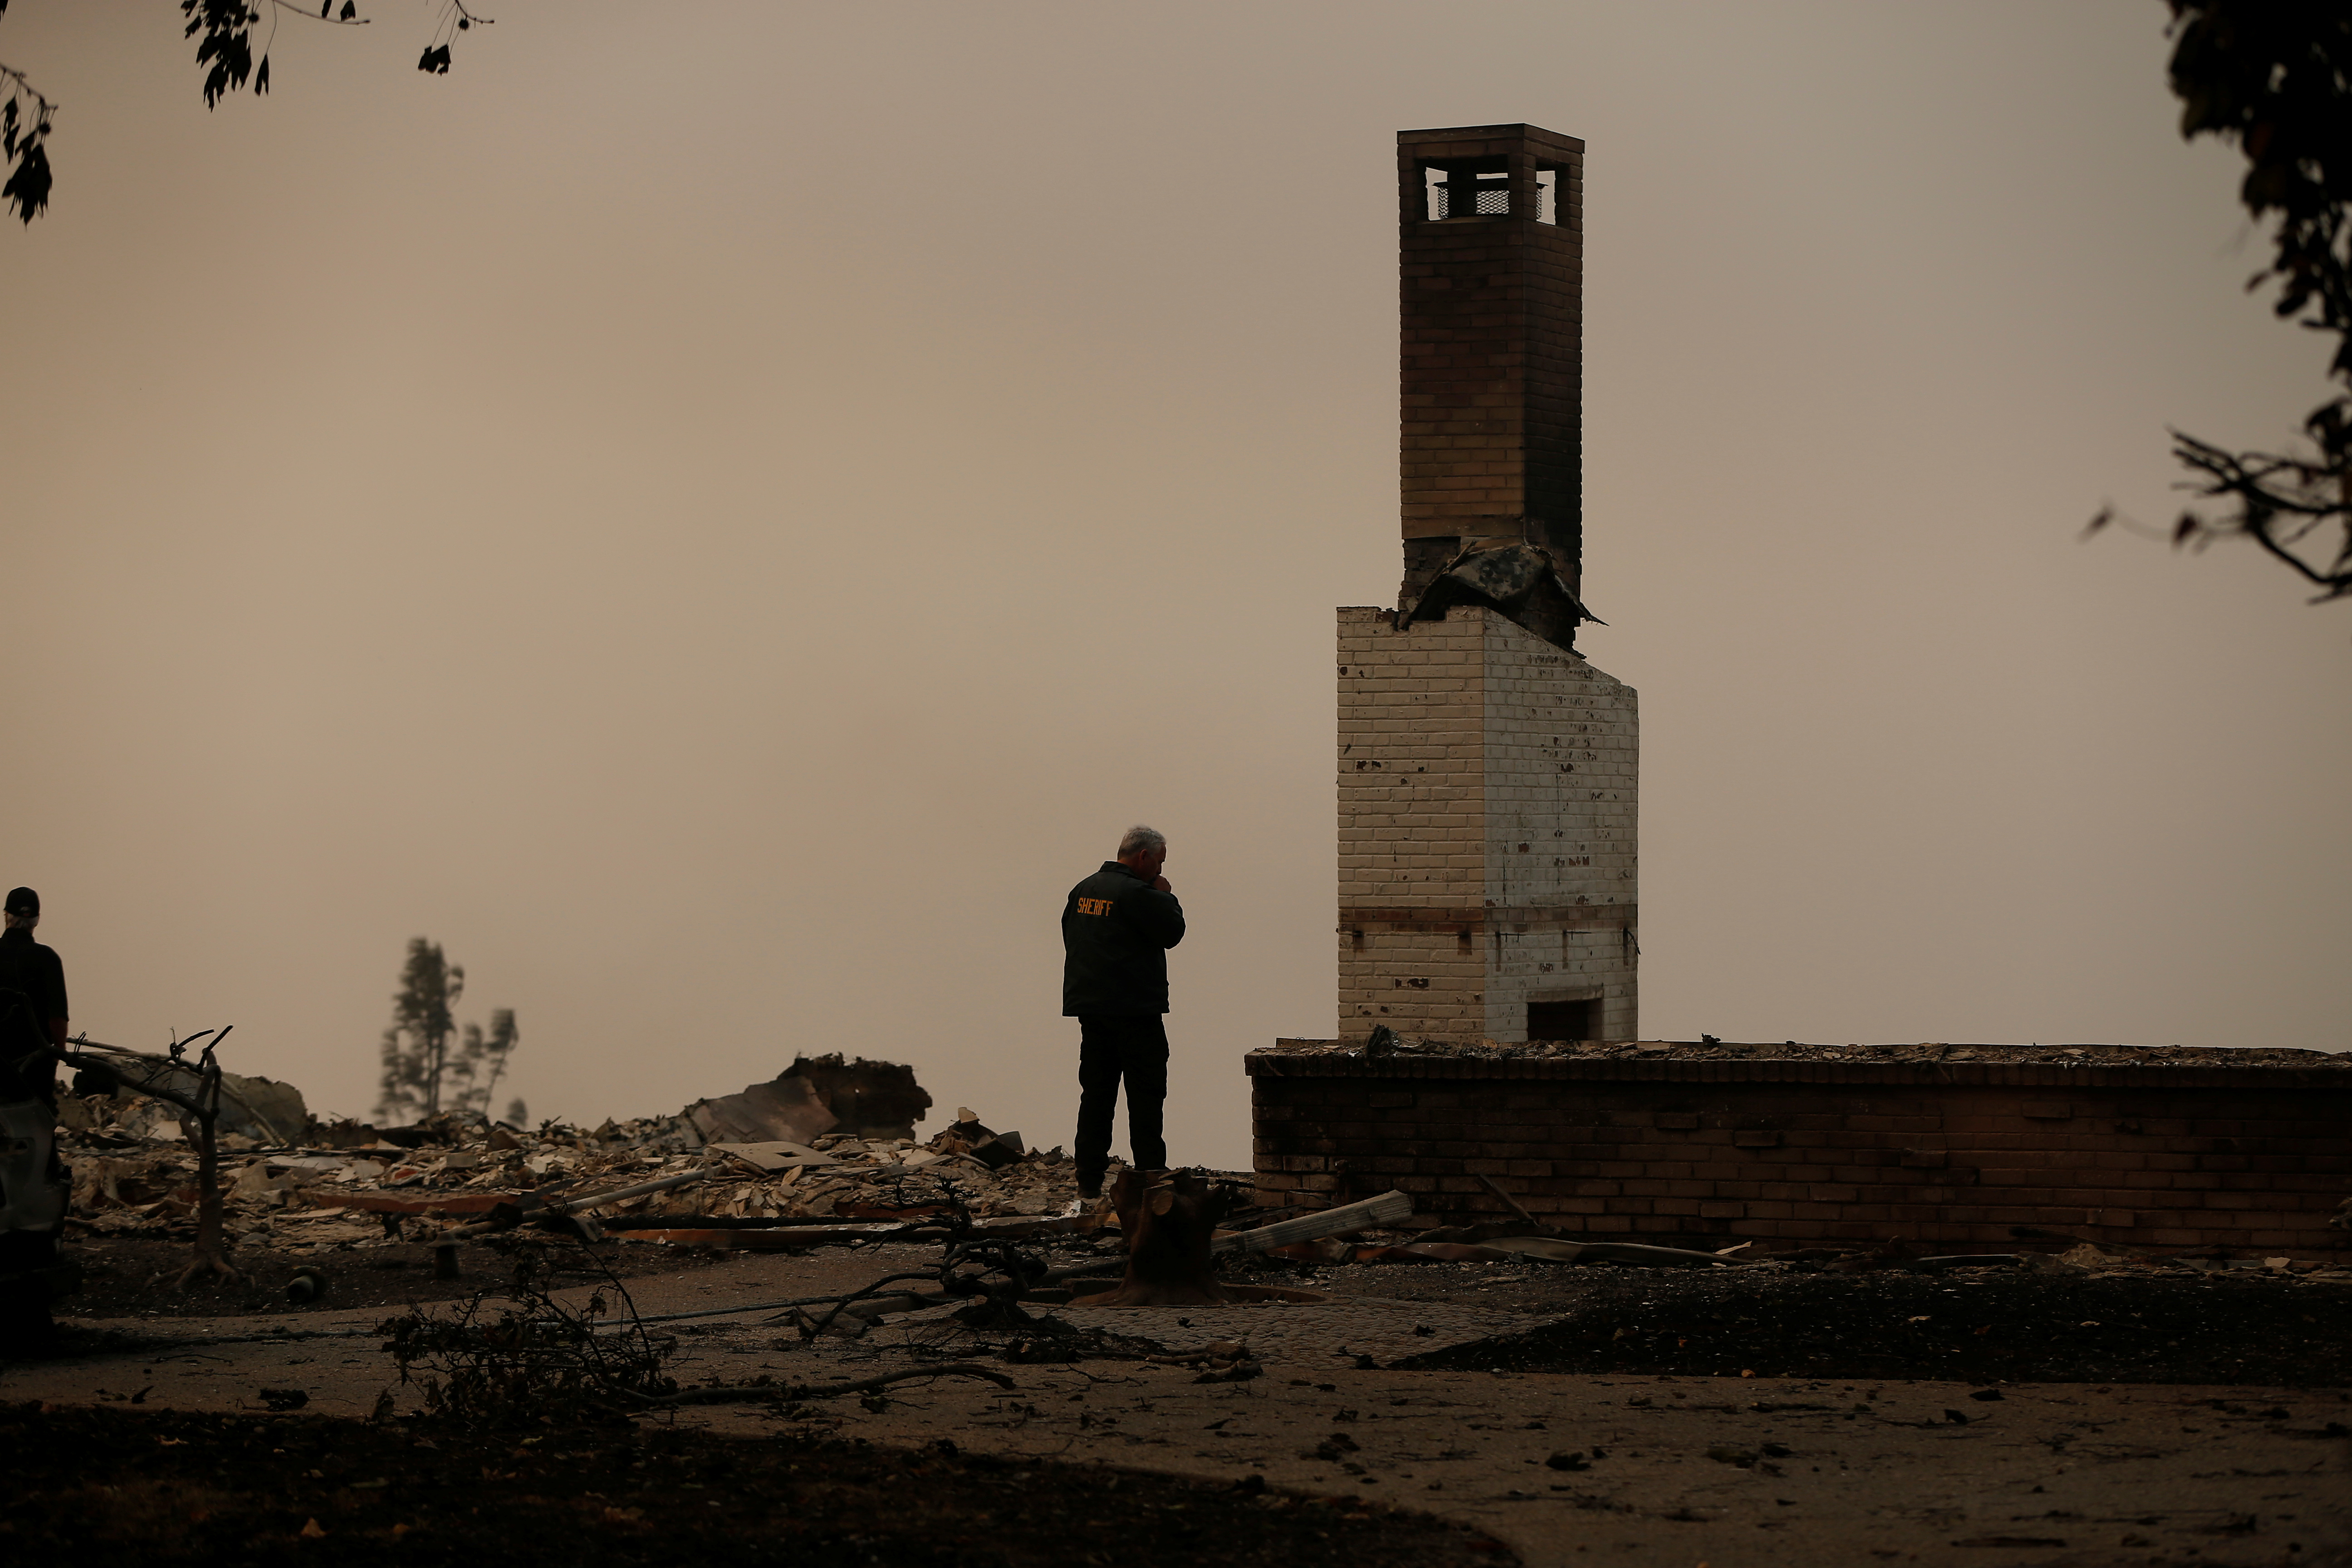 A Butte County Sheriff deputy surveys a burned out home destroyed by the Camp fire in Paradise